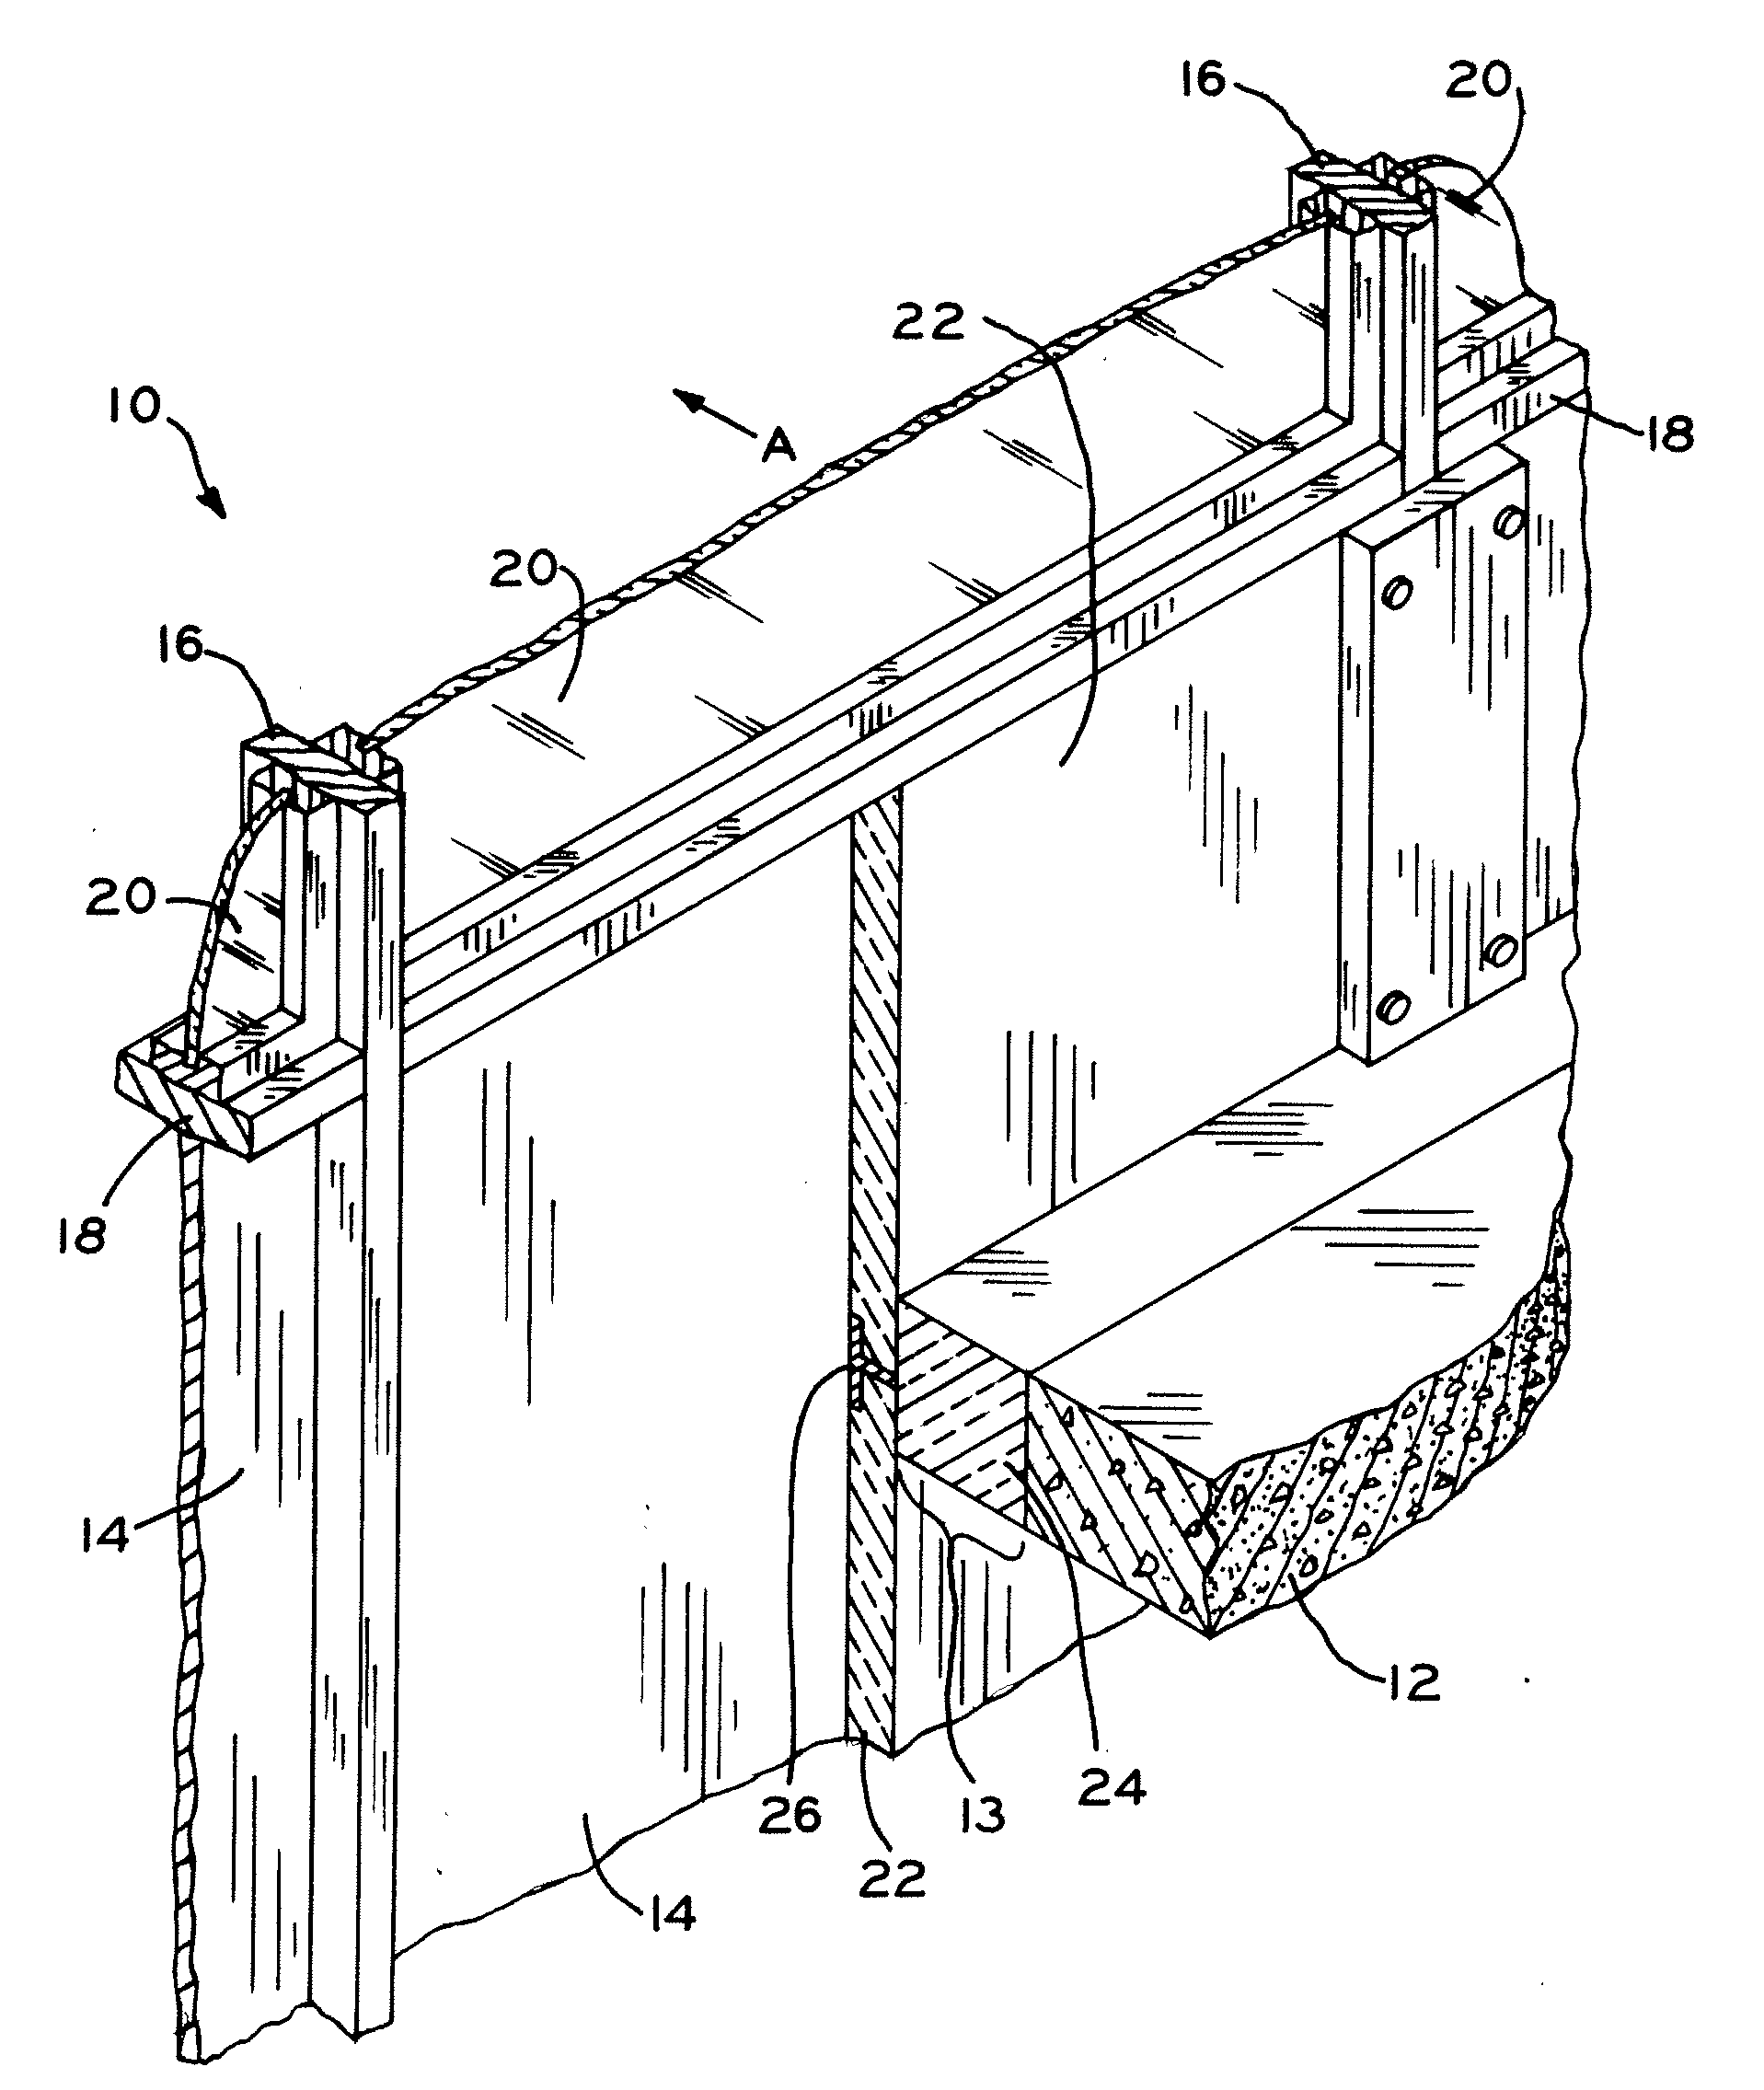 Methods and apparatuses for positioning and securing safing insulation